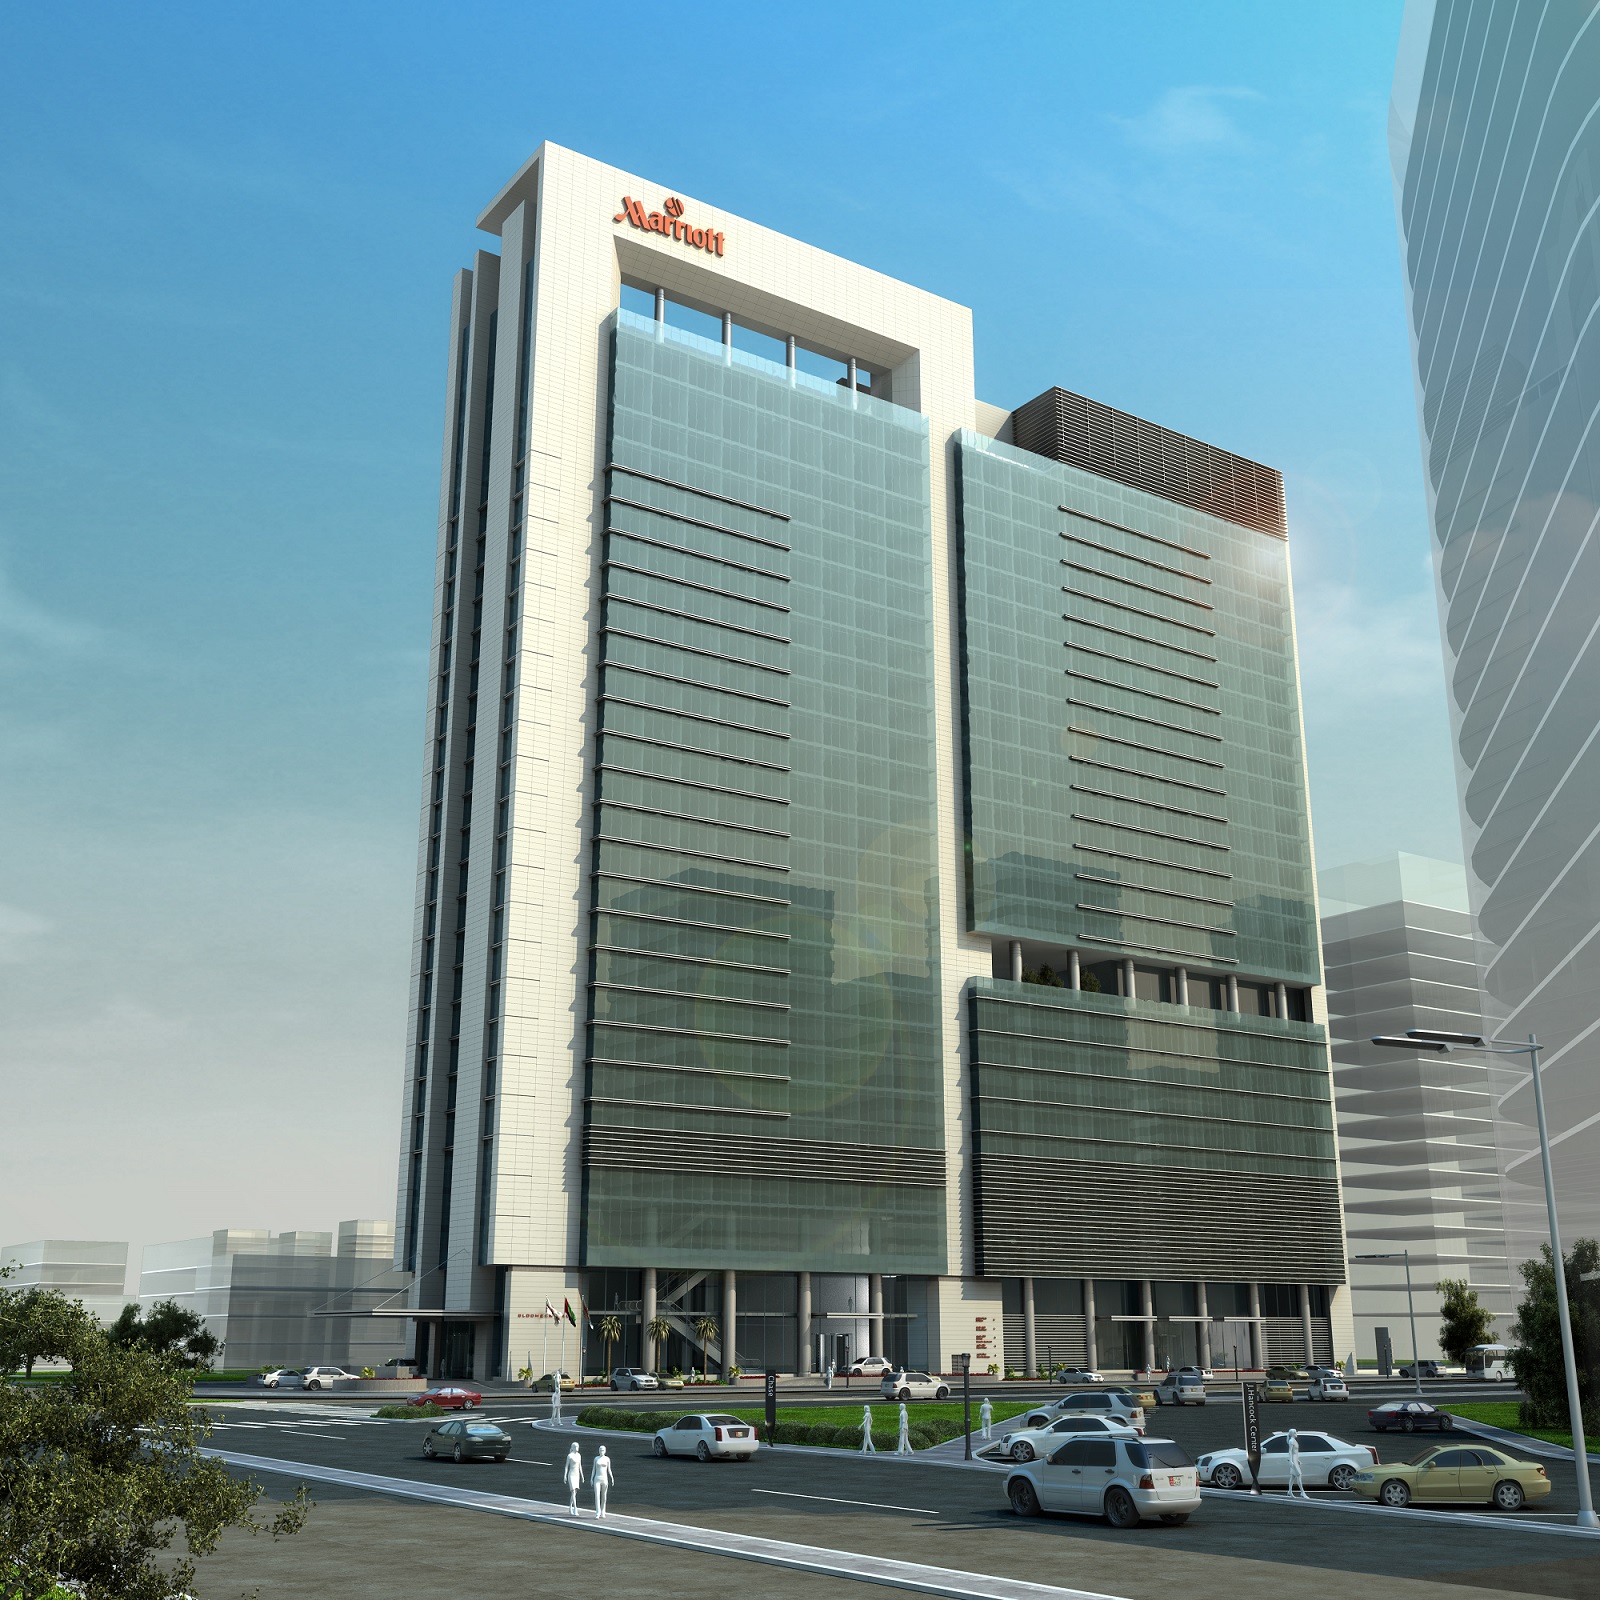 the-marriott-hotel-and-marriott-executive-apartments-downtown-abu-dhabi-developed-by-bloom-holding-officially-opens-today-in-the-heart-of-the-uaes-capital